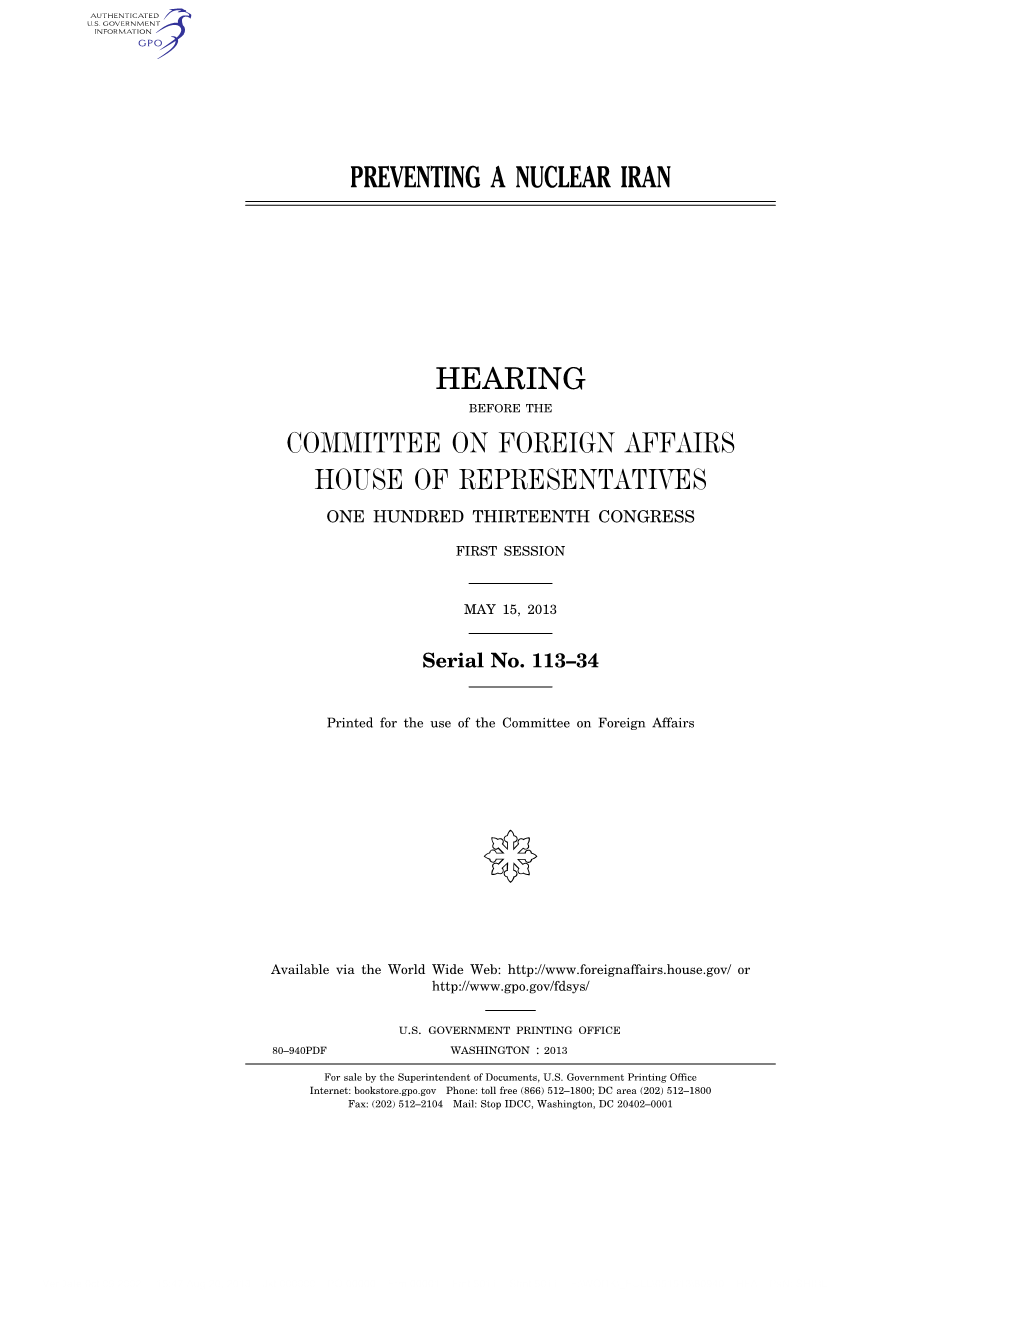 Preventing a Nuclear Iran Hearing Committee on Foreign Affairs House of Representatives